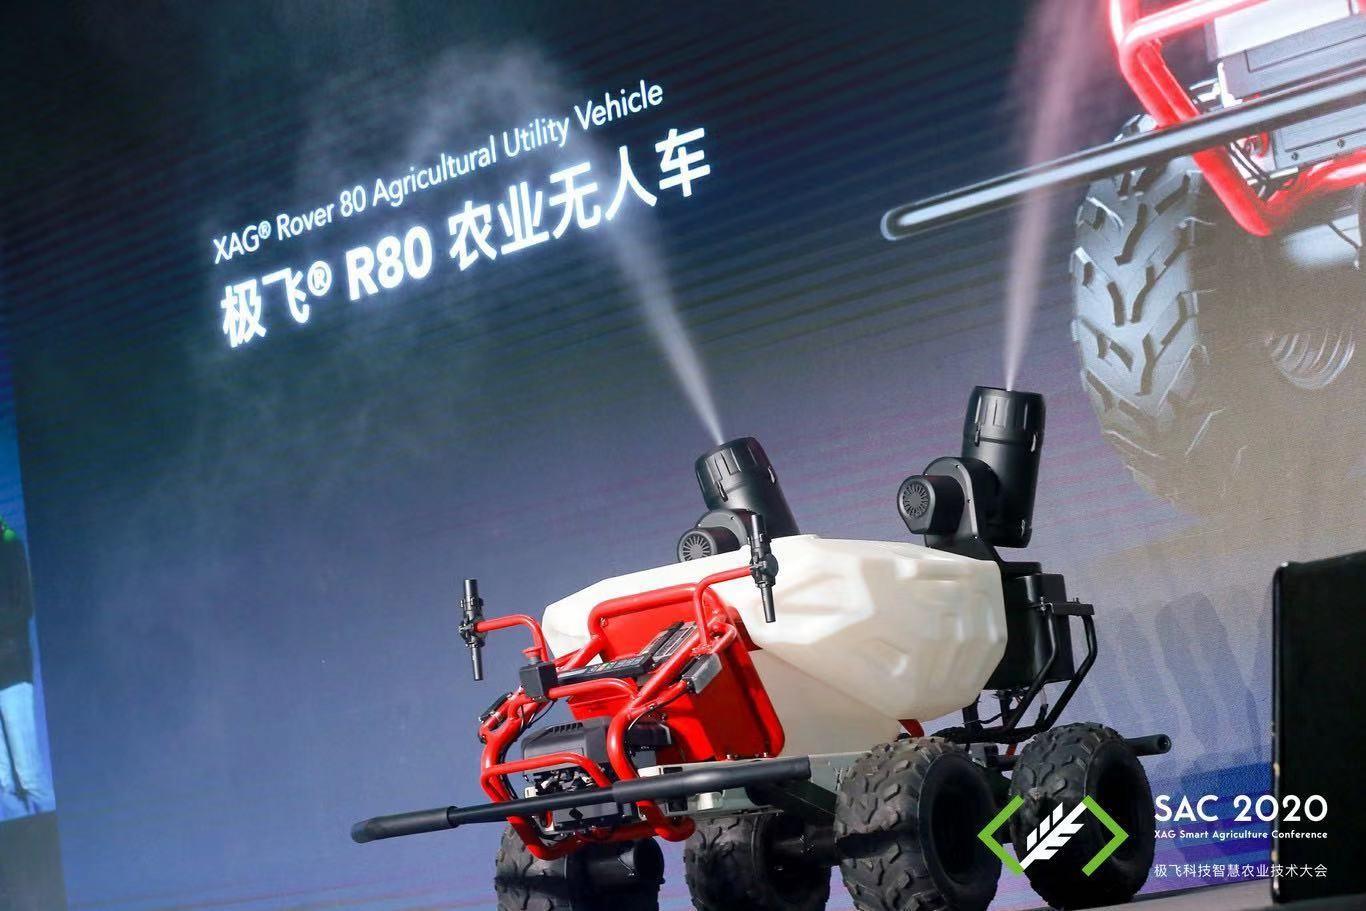 XAG R80 Agricultural Utility Vehicle debuted on stage